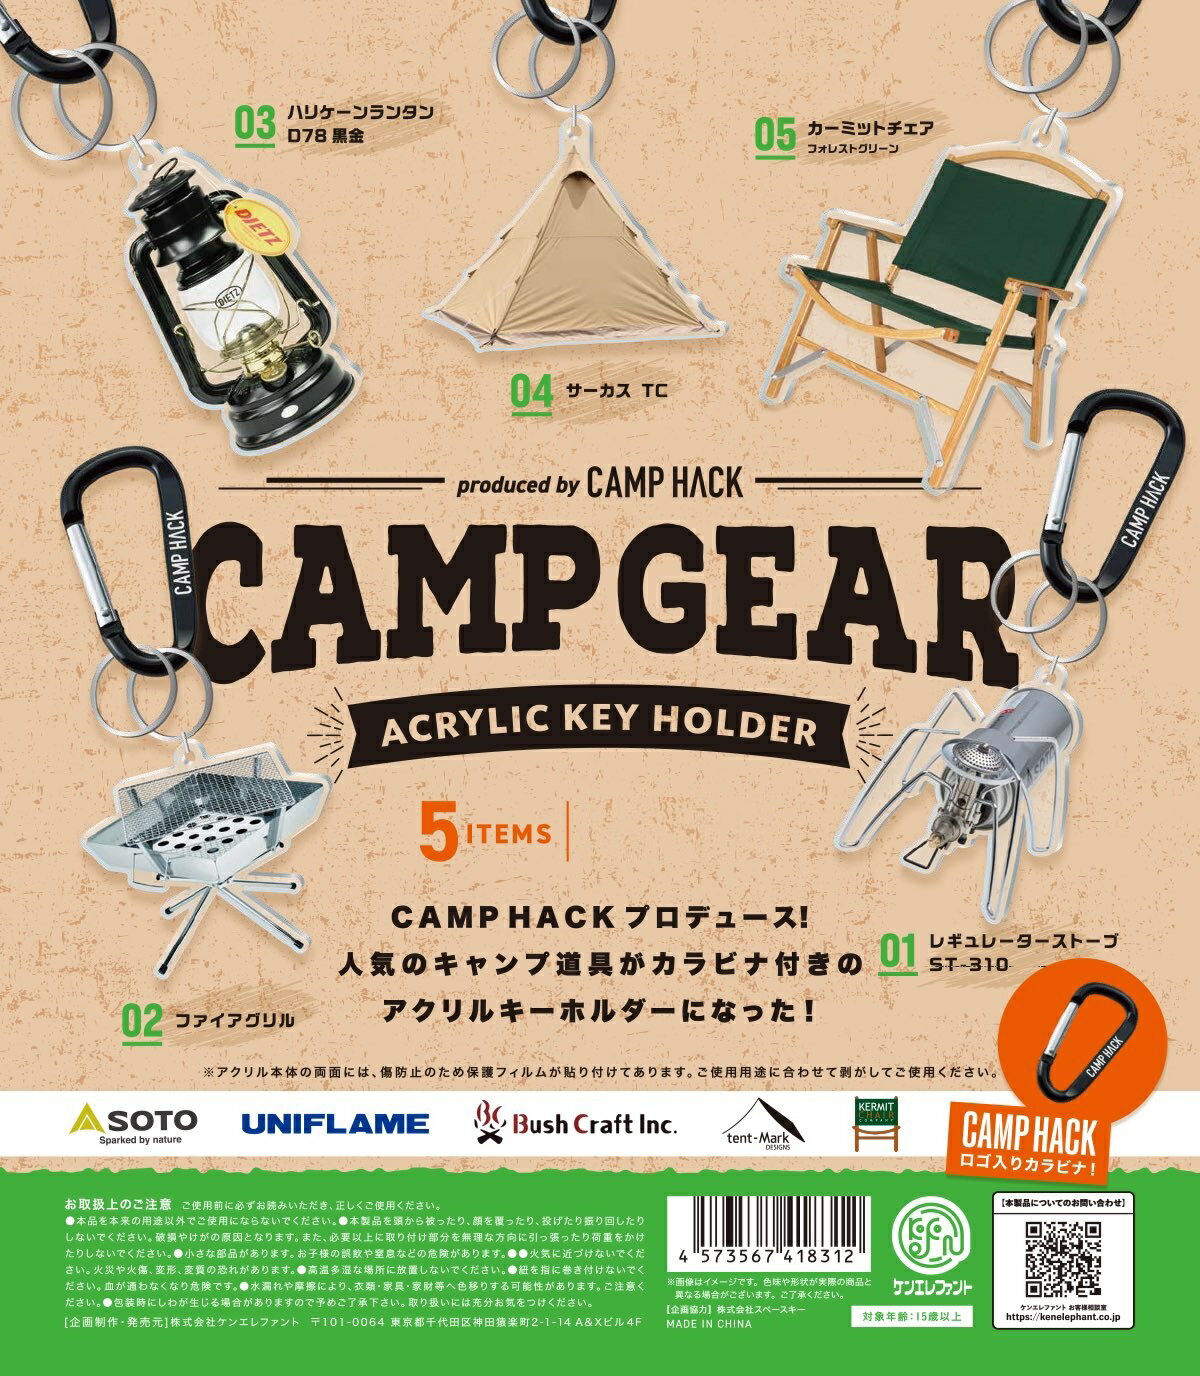 CAMP GEAR アクリルキーホルダー produced by CAMP HACK 全5種コンプリートセット